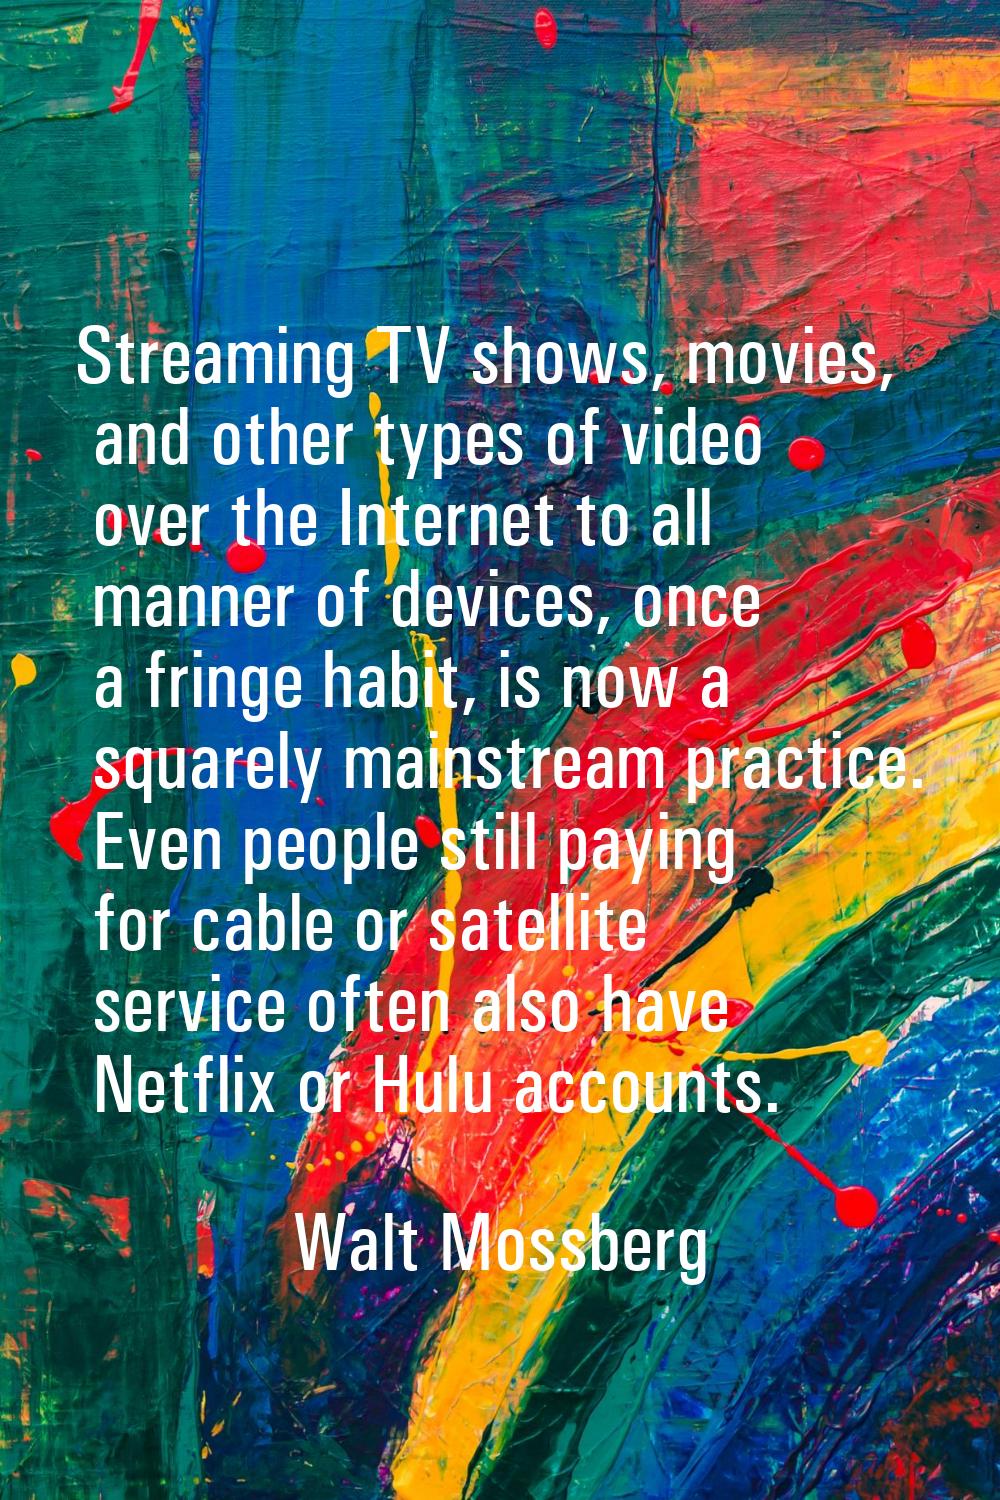 Streaming TV shows, movies, and other types of video over the Internet to all manner of devices, on